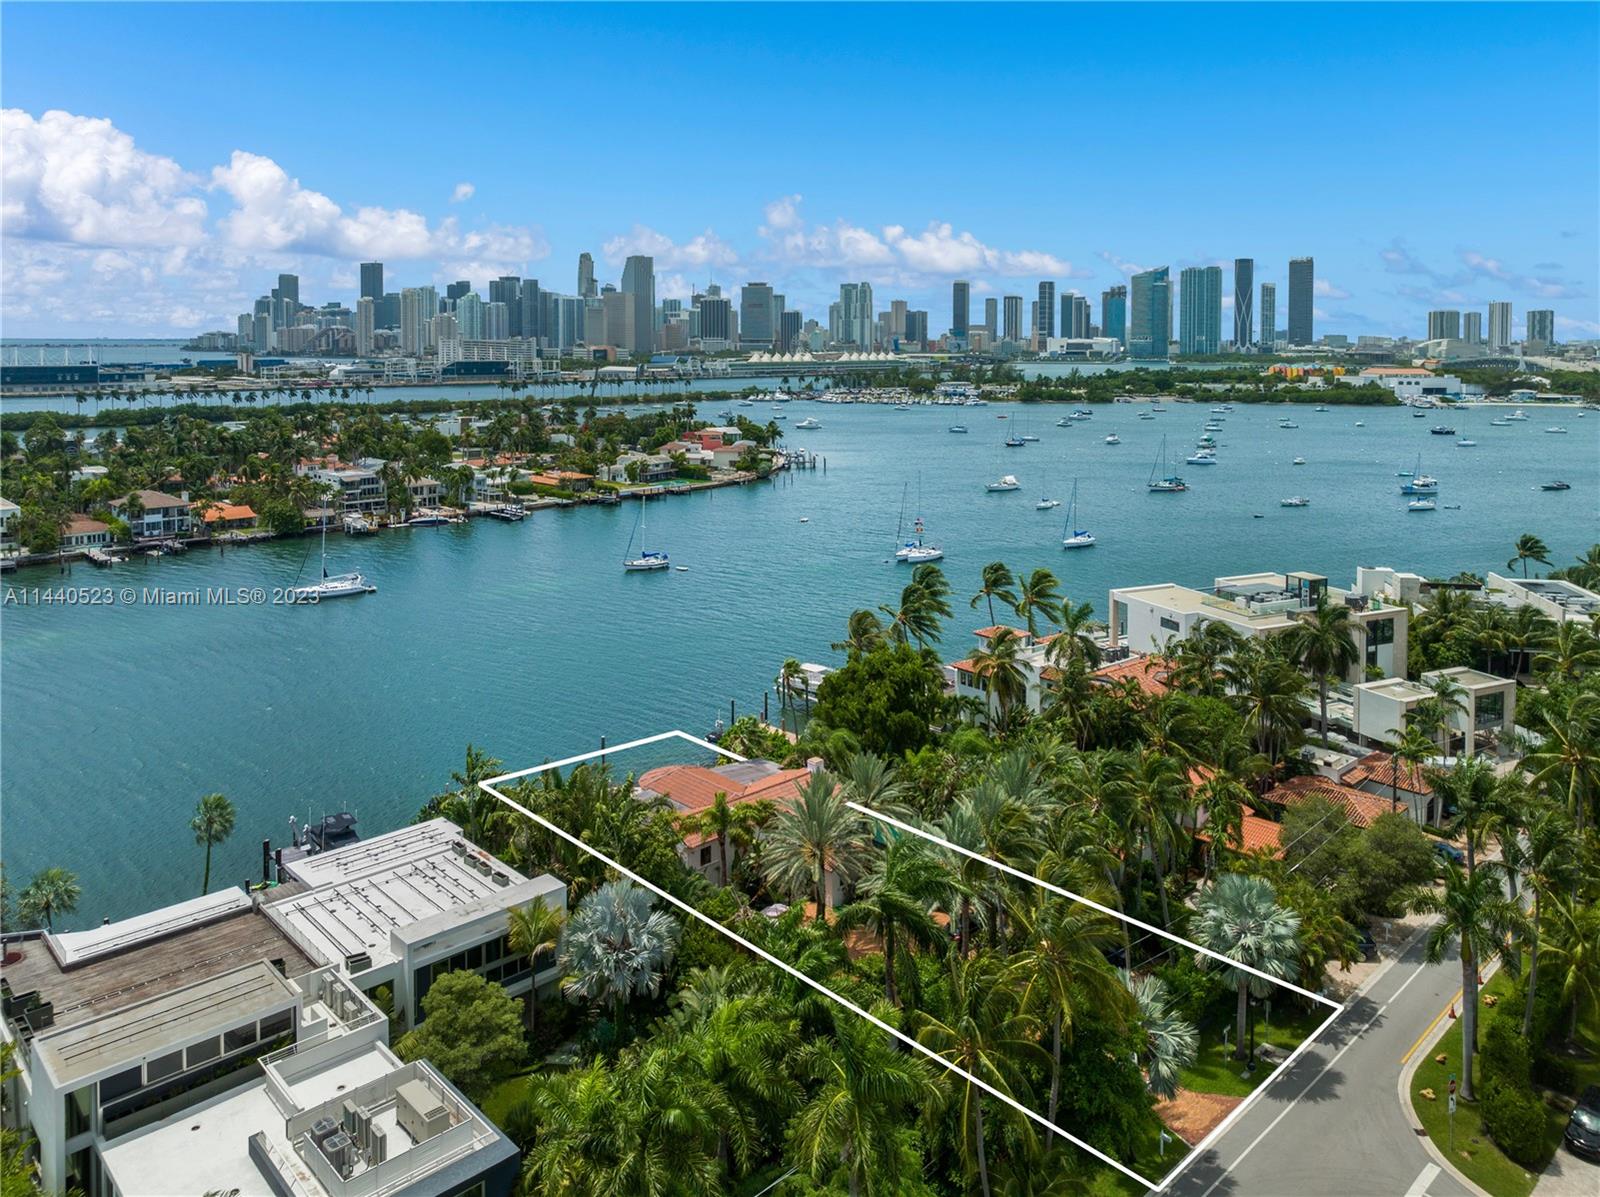 Build your dream home on a rare waterfront south facing double lot on coveted Hibiscus Island. This 18,375 square foot lot boasts 101’ of waterfrontage with southern exposure on one of Miami Beach’s most prestigious and guard gated island neighborhoods.  Perfectly positioned parcel captures breathtaking sunsets over Biscayne Bay and offers captivating panoramic views of the Downtown Miami skyline. This exceptional location is just minutes away from South Beach, Downtown, world class dining, shopping, and beaches.